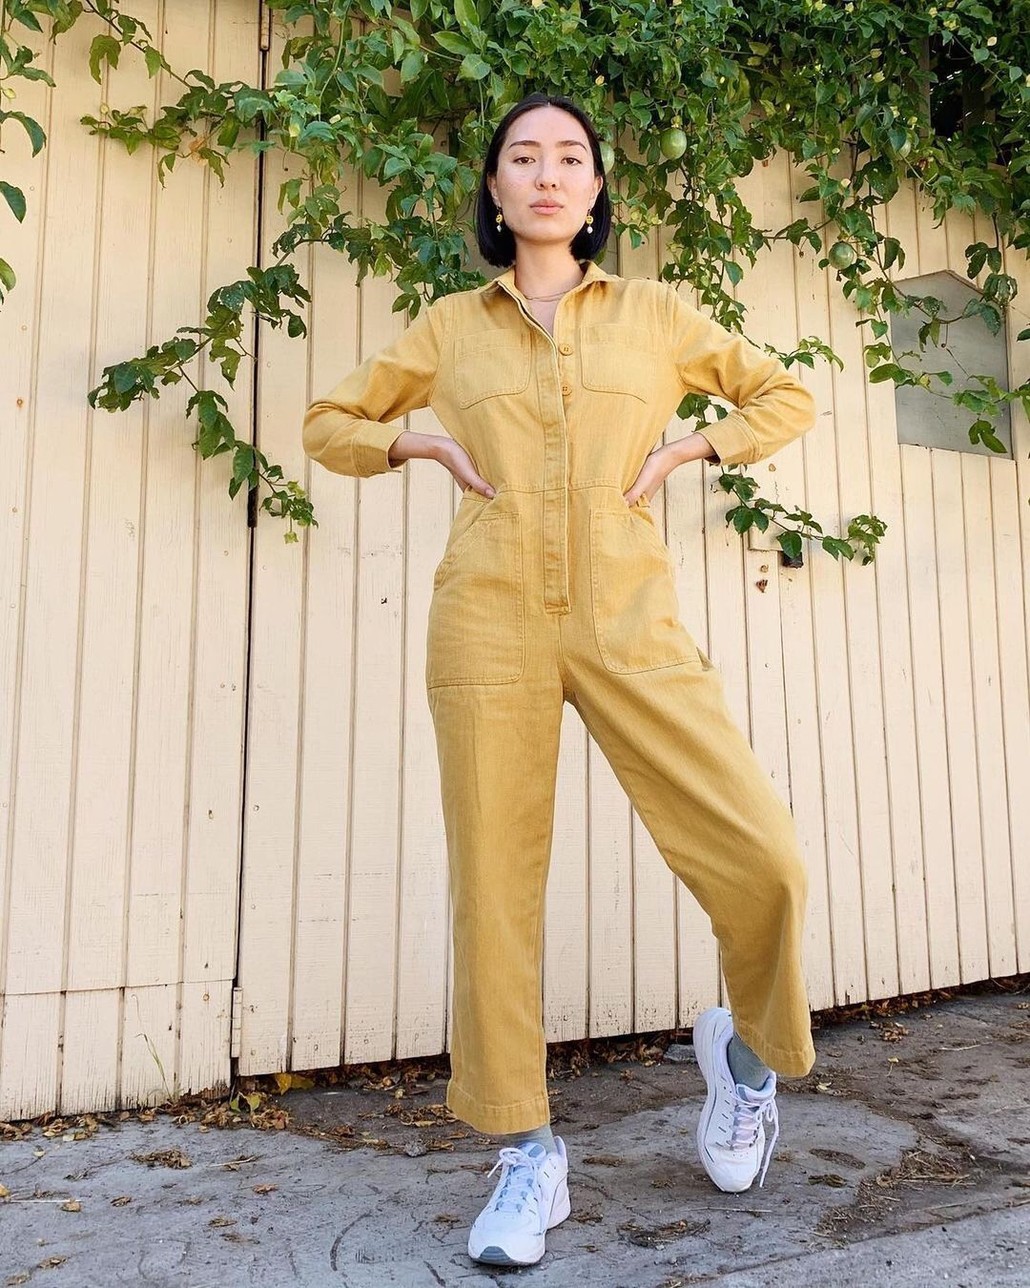 How to Style: Women's Utility Coveralls